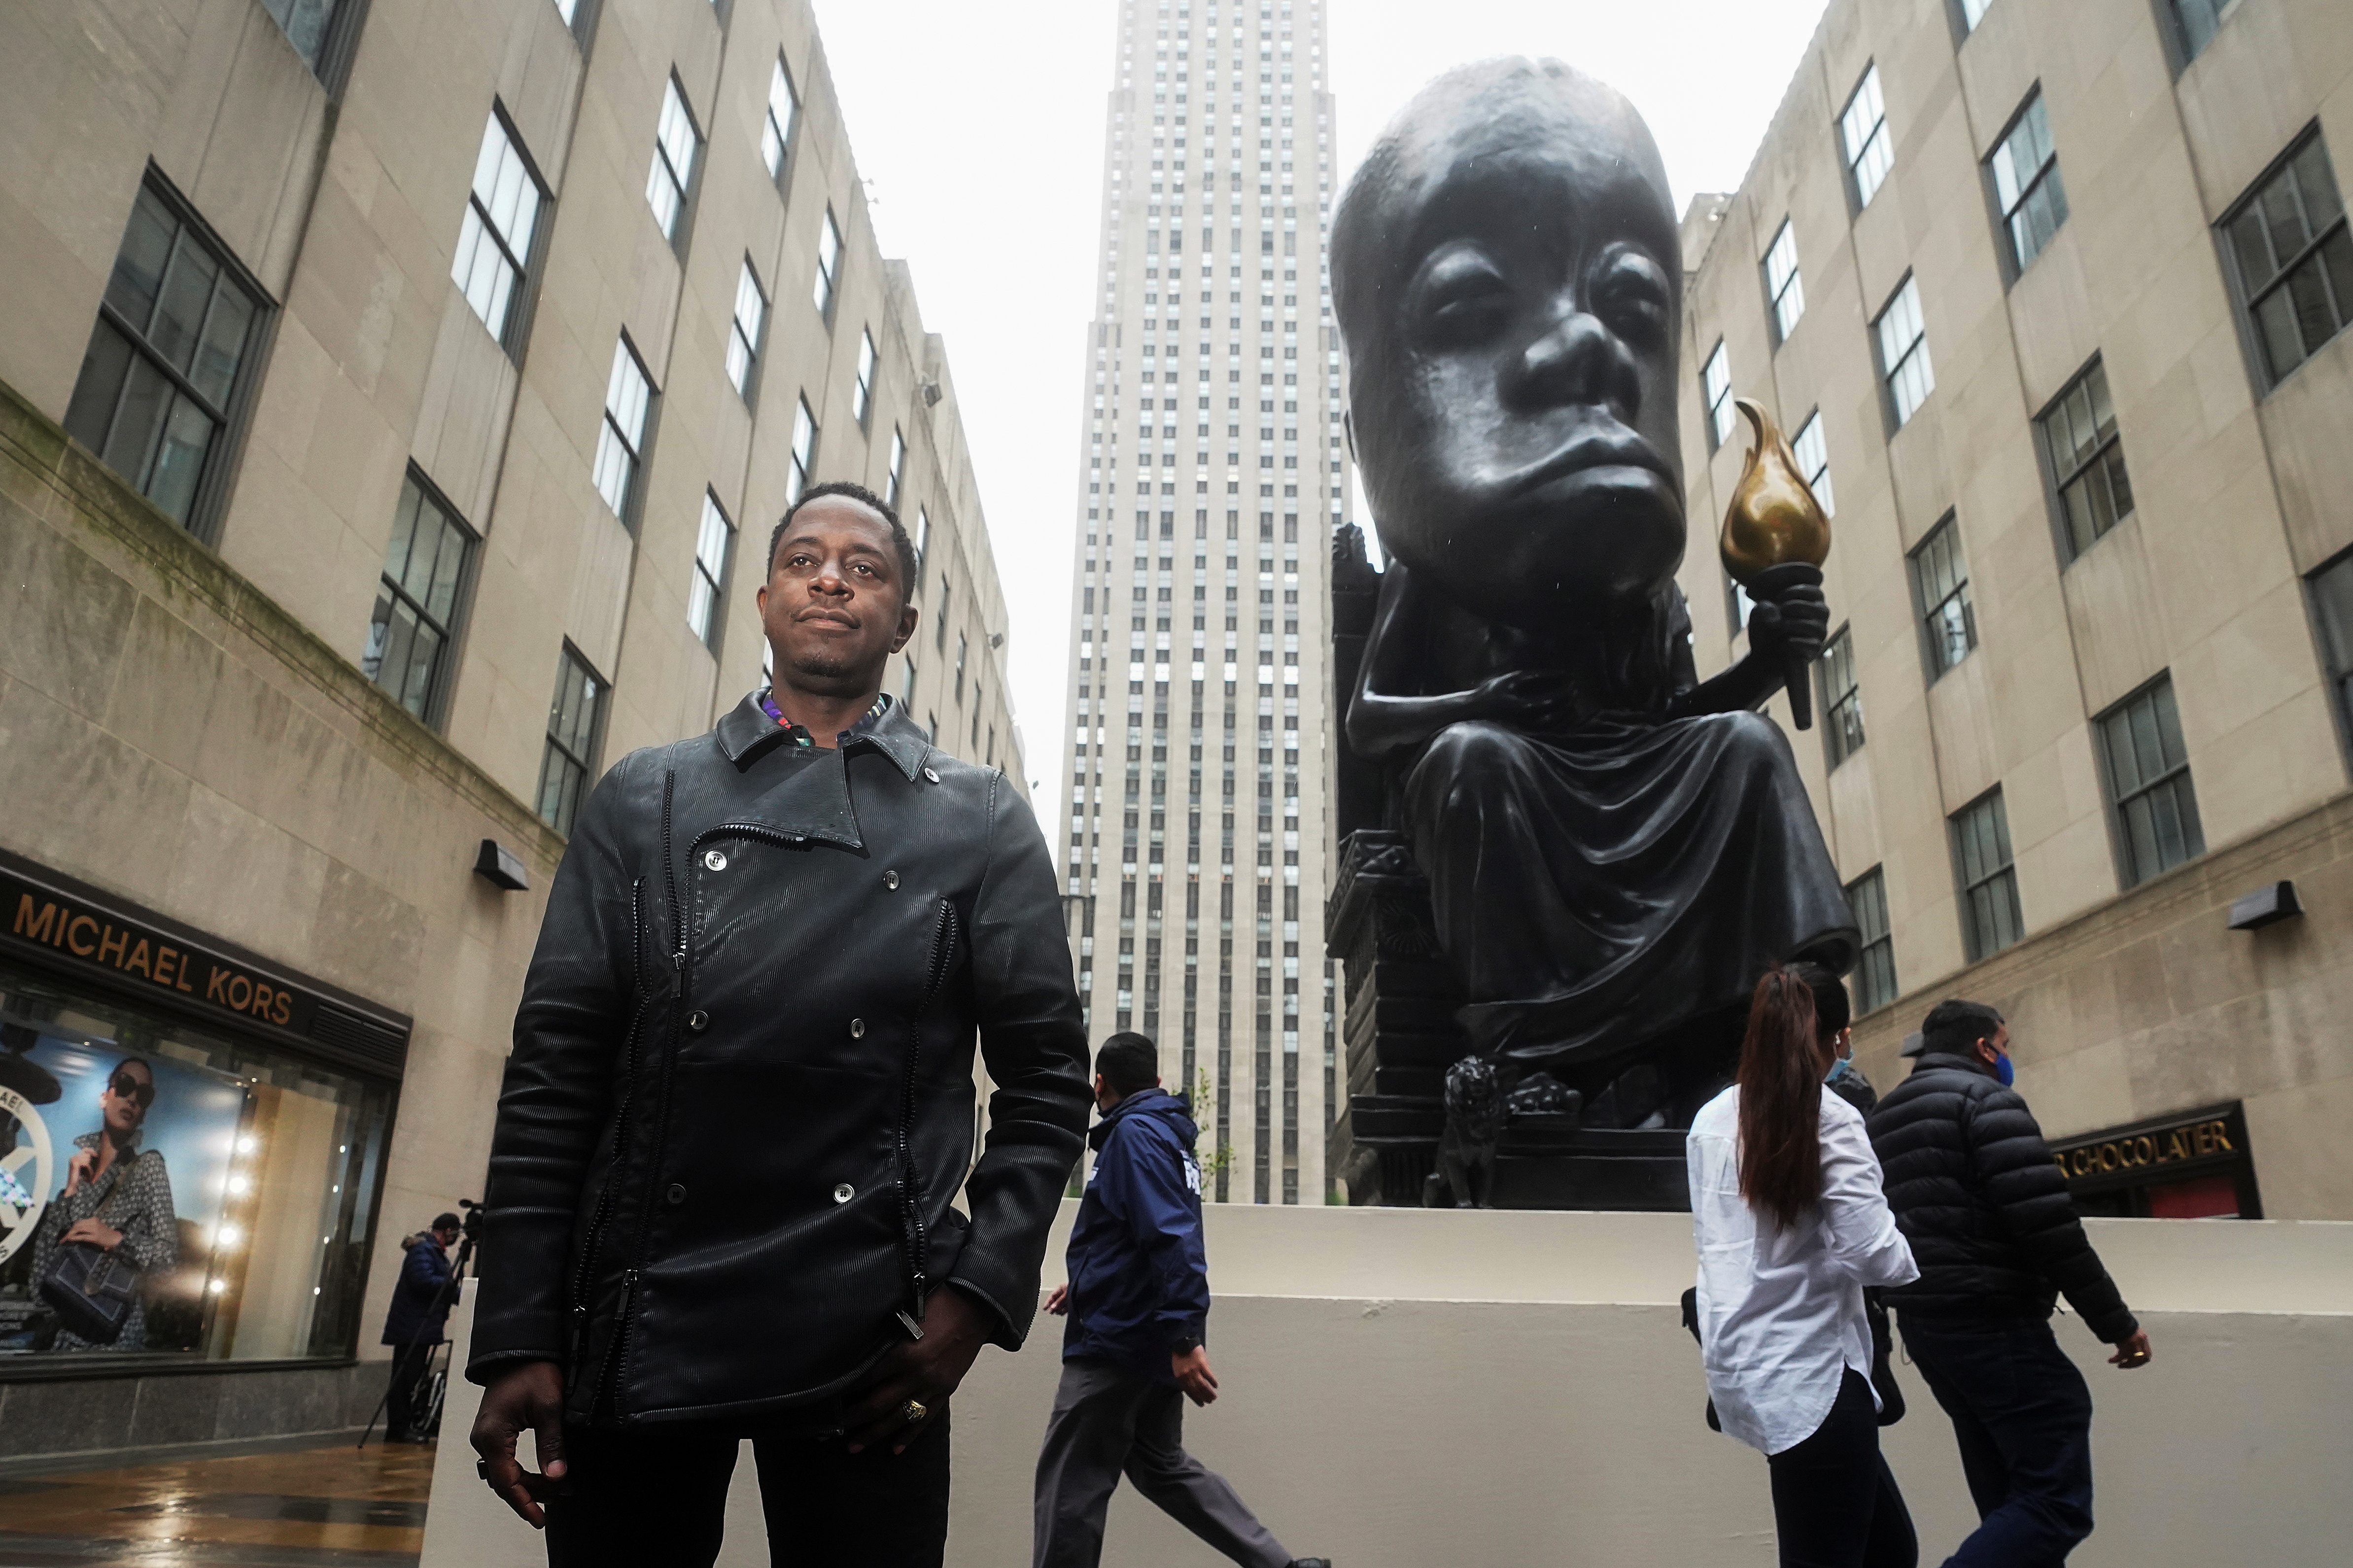 Sanford Biggers poses for a photo in front of his statue 'Oracle' in New York City